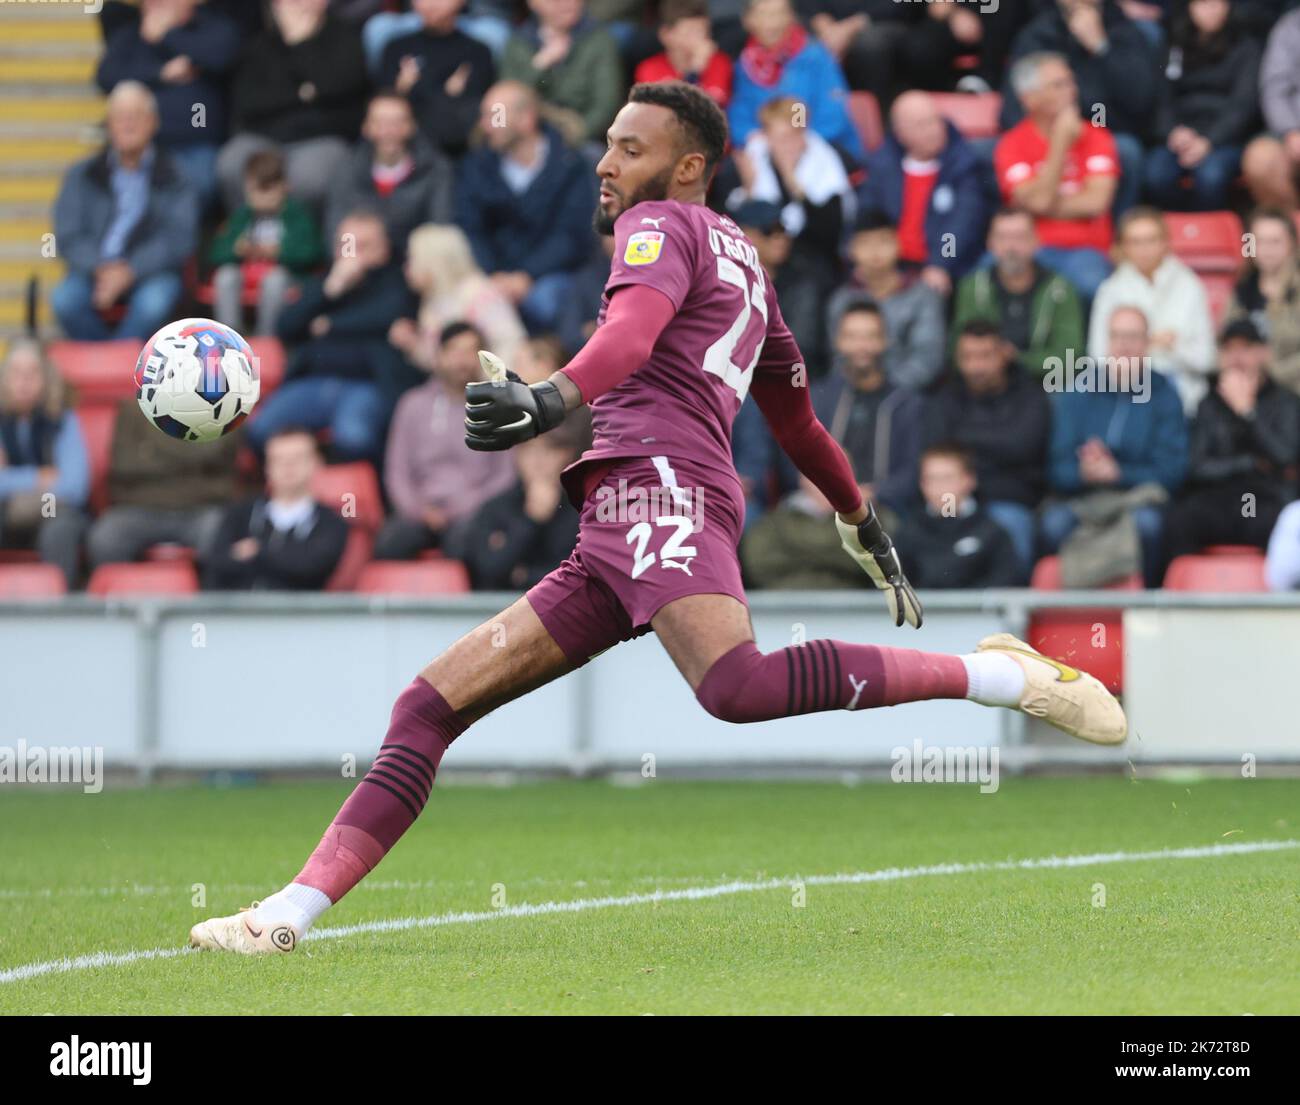 Lawrence Vigouroux of Leyton Orient during League Two soccer match between Leyton Orient against Northampton Town at Brisbane Road stadium, London on Stock Photo